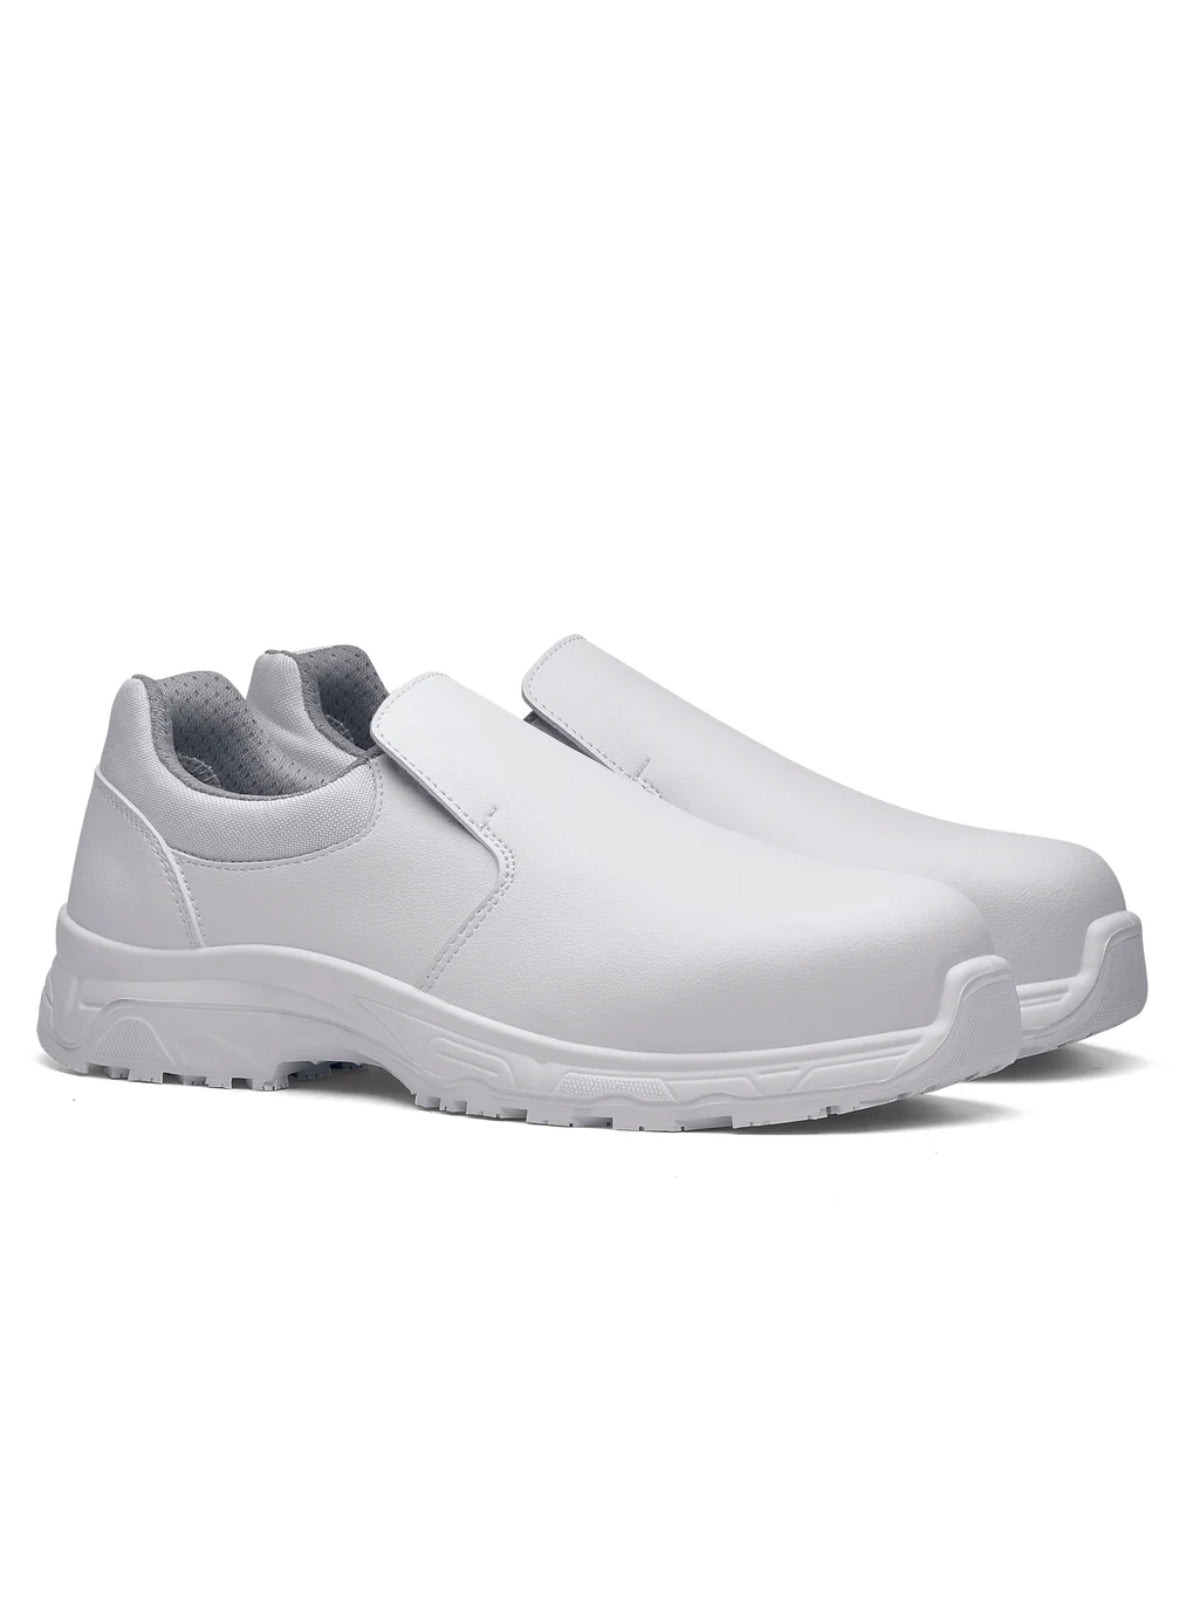 Unisex Safety Shoe Catania White (S3) by Shoes For Crews -  ChefsCotton